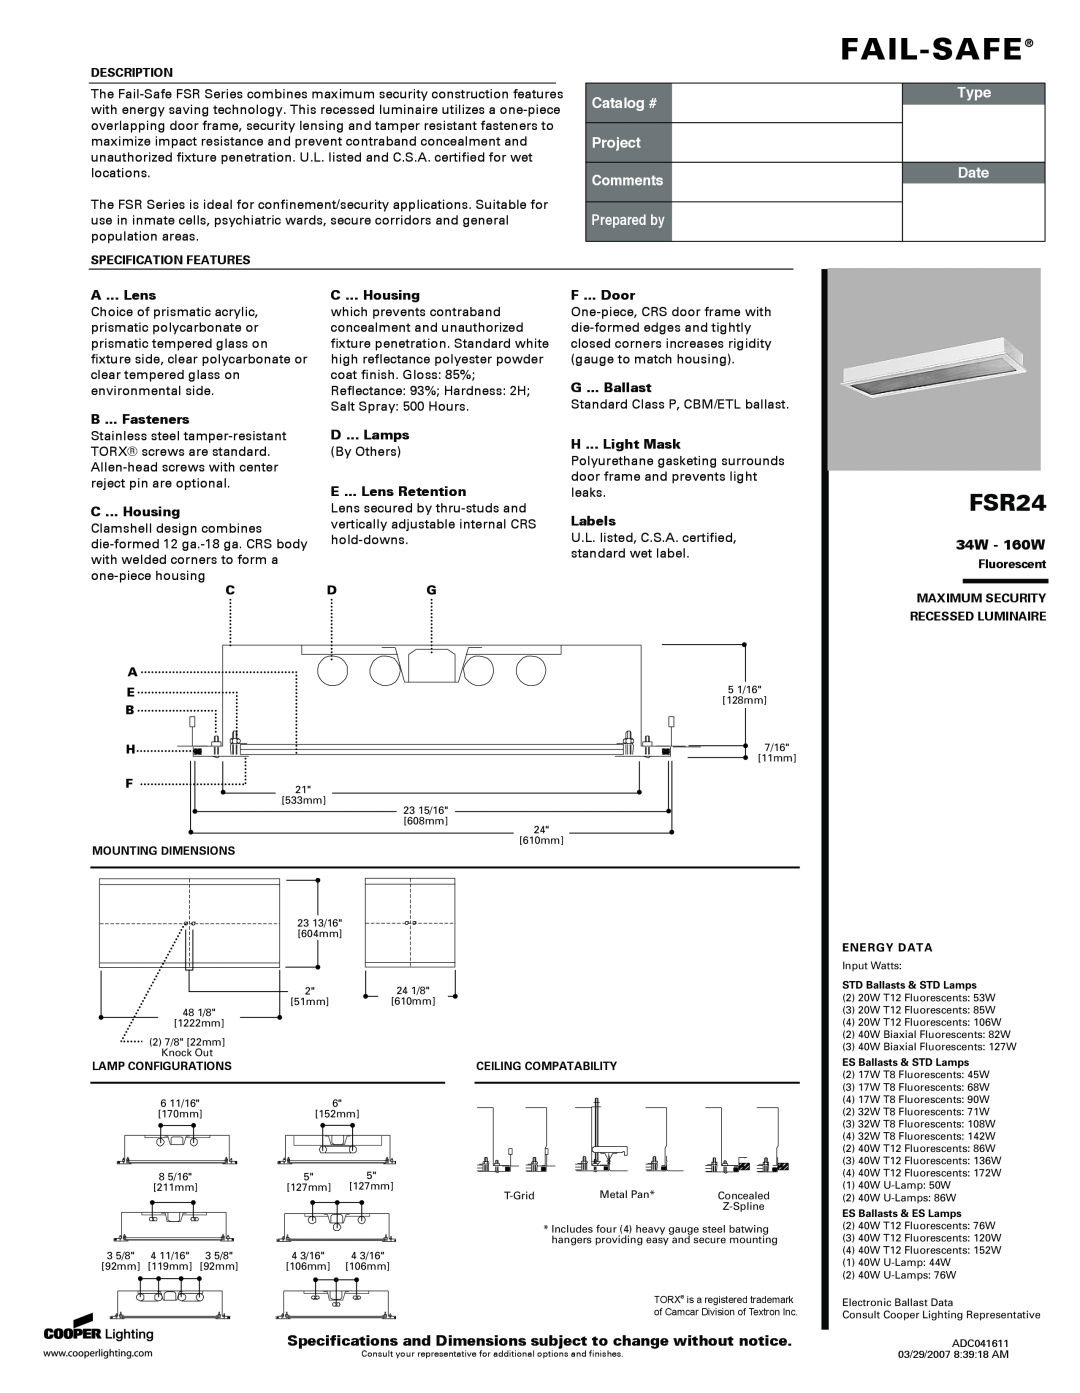 Cooper Lighting FSR24 specifications 34W - 160W, Fail-Safe, Catalog #, Project Comments, Prepared by, Type, Date 